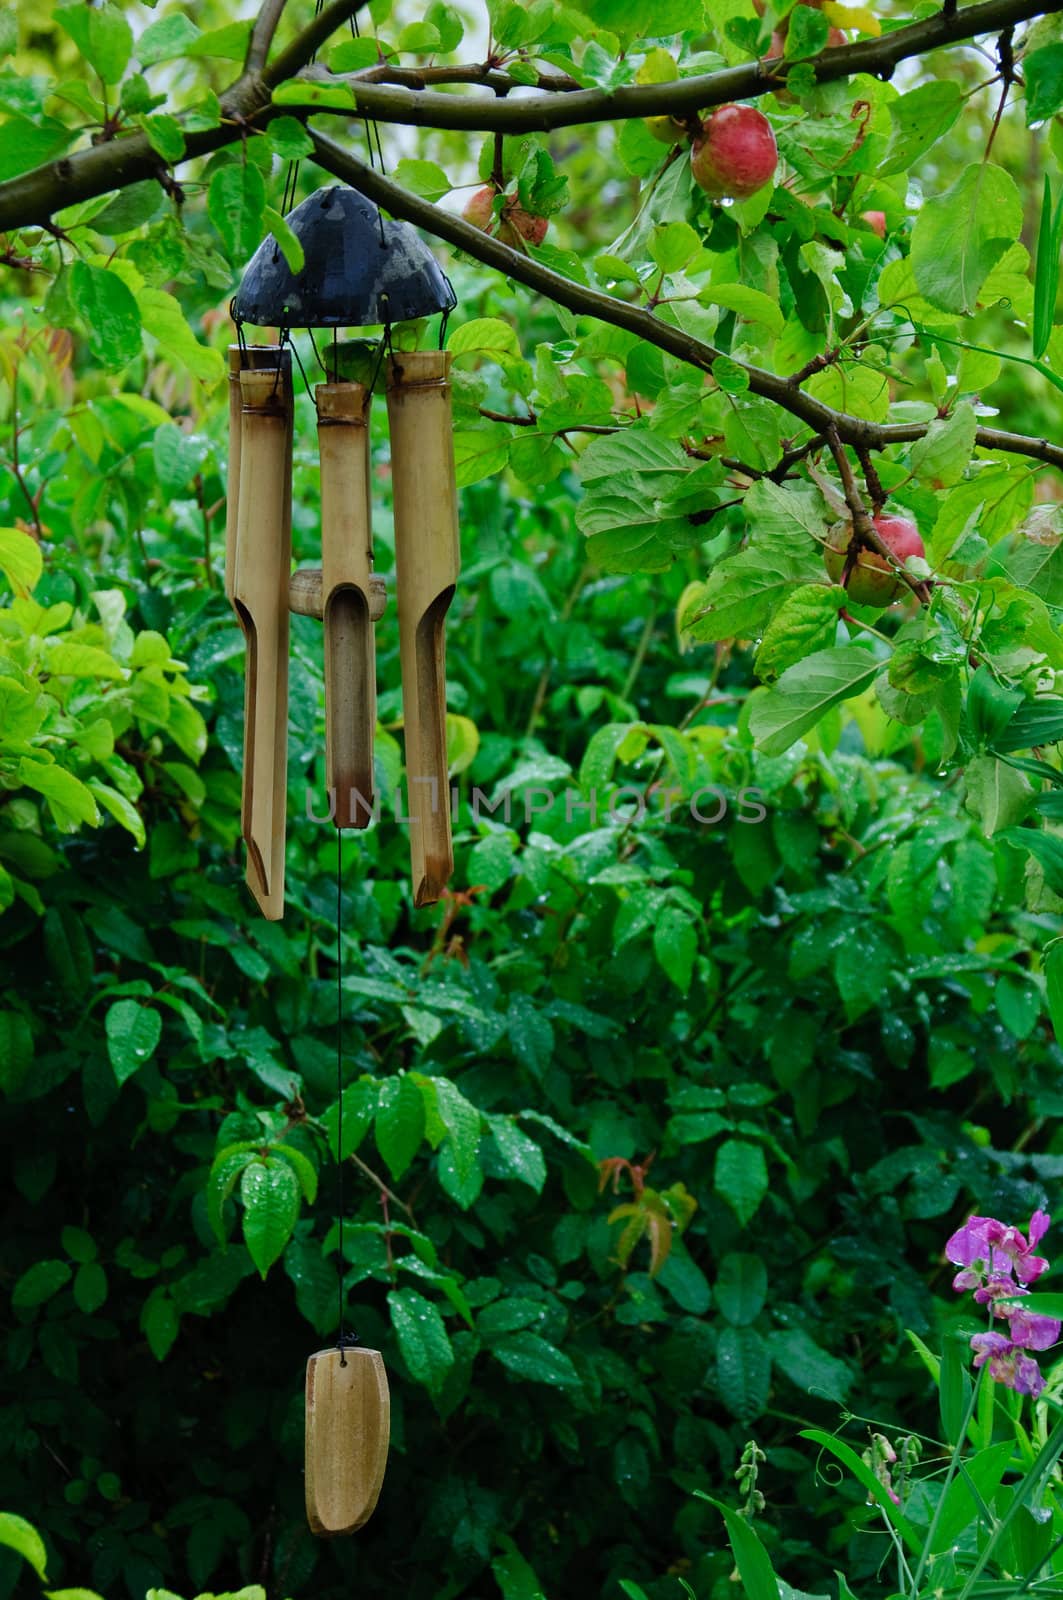 A bamboo wind chimes hanging in an apple tree in a garden.